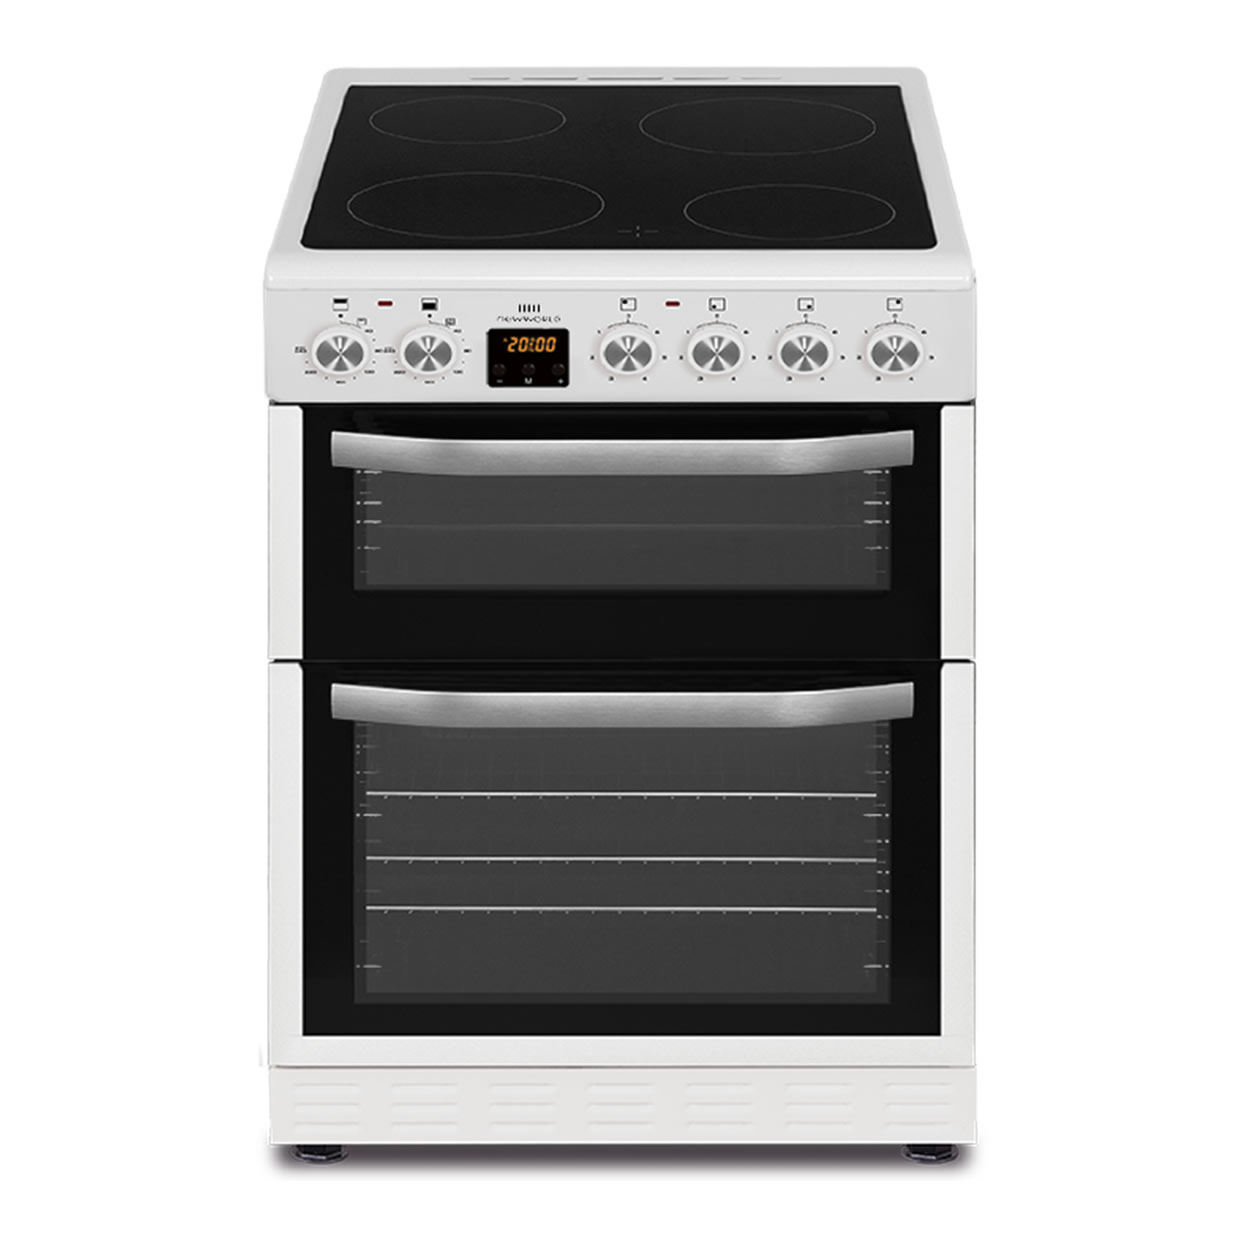 New-World 600mm Double Oven Electric Cooker Ceramic Hob White